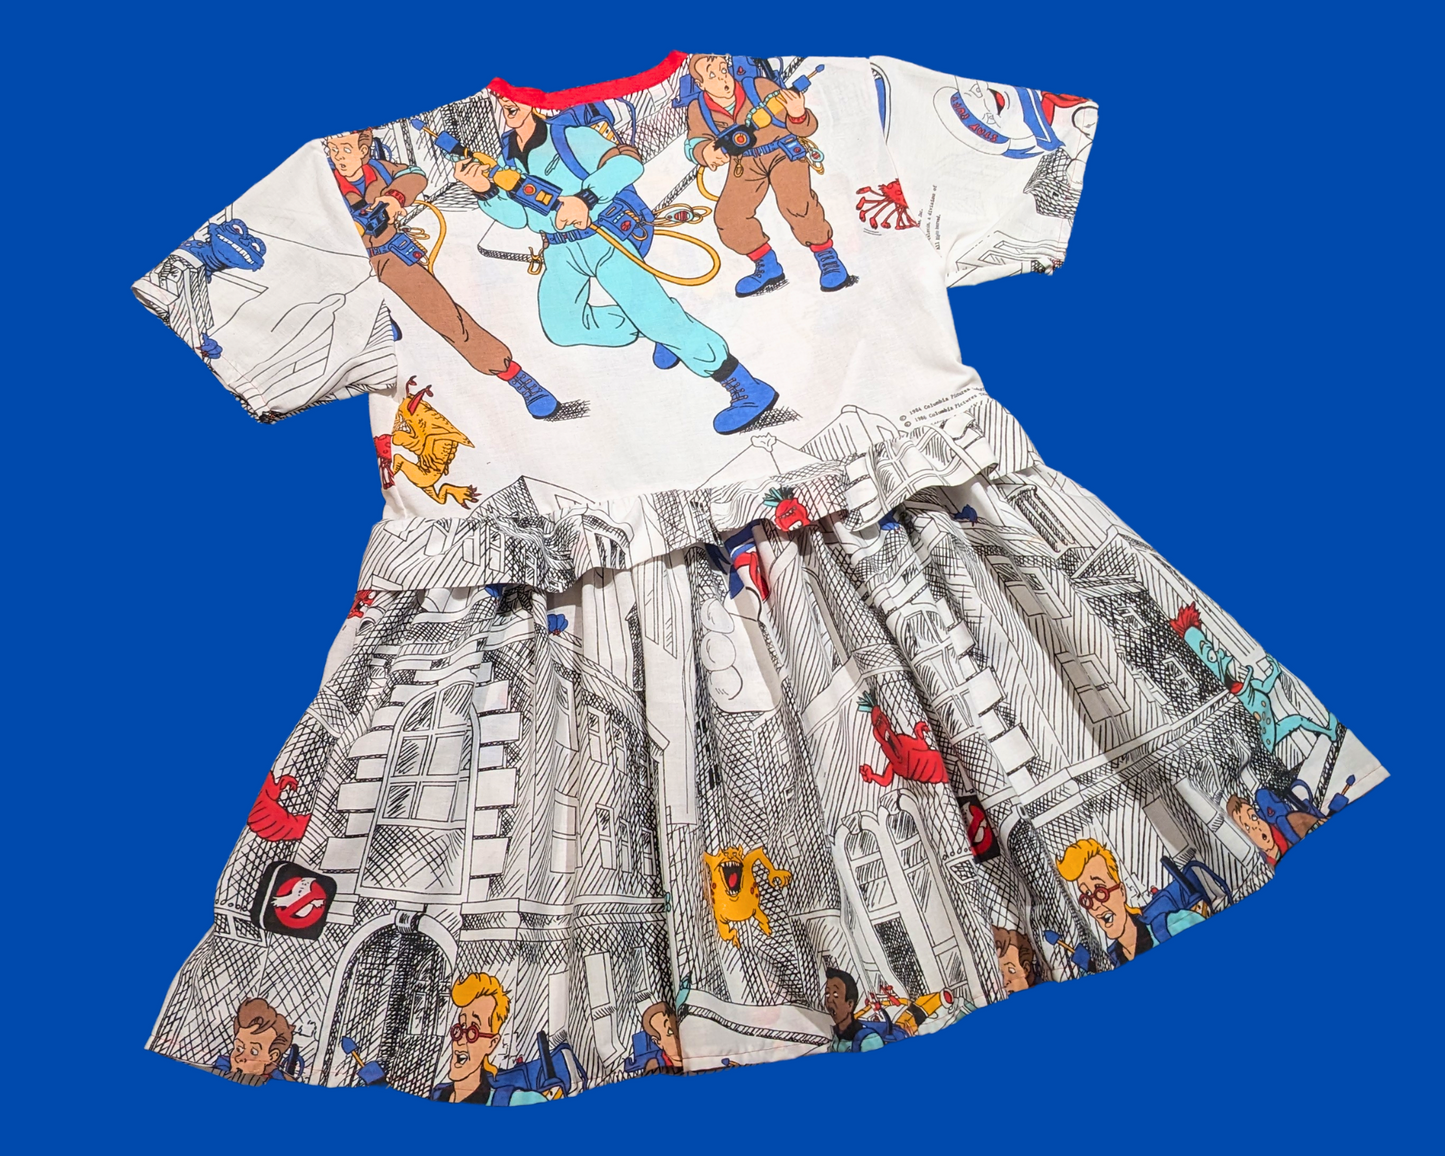 Handmade, Upcycled Vintage 1986 Ghostbusters Bedsheet T-Shirt Dress Fits S-M-L-XL